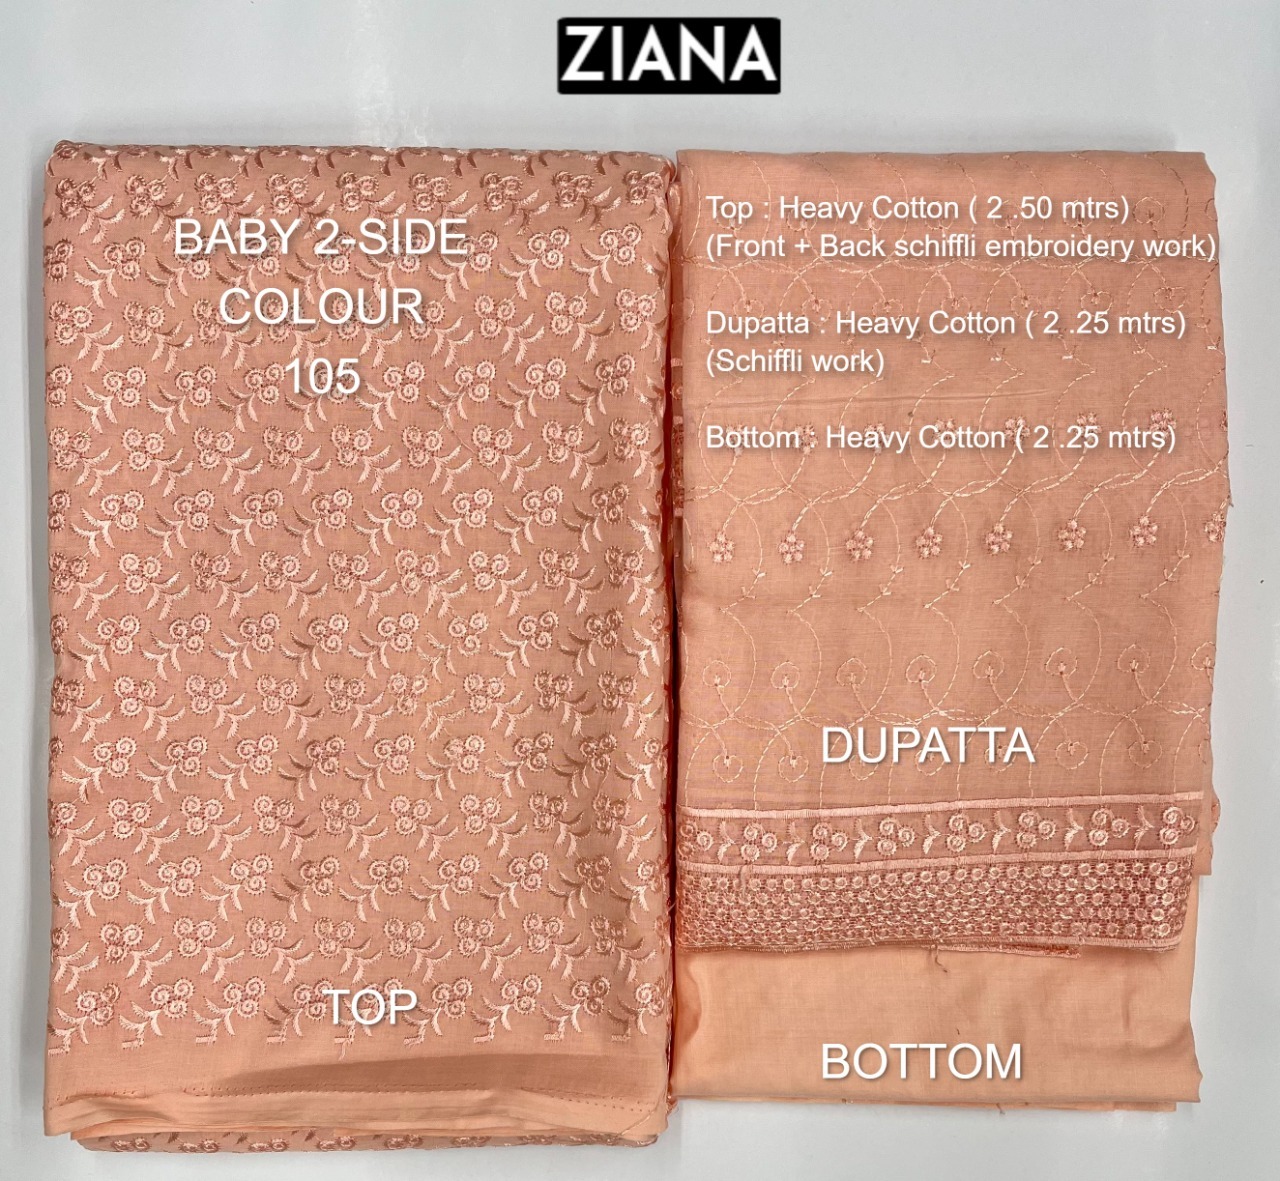 ziana baby 2 side colour 105 heavy cotton attrective embroidery salwar suit colour set